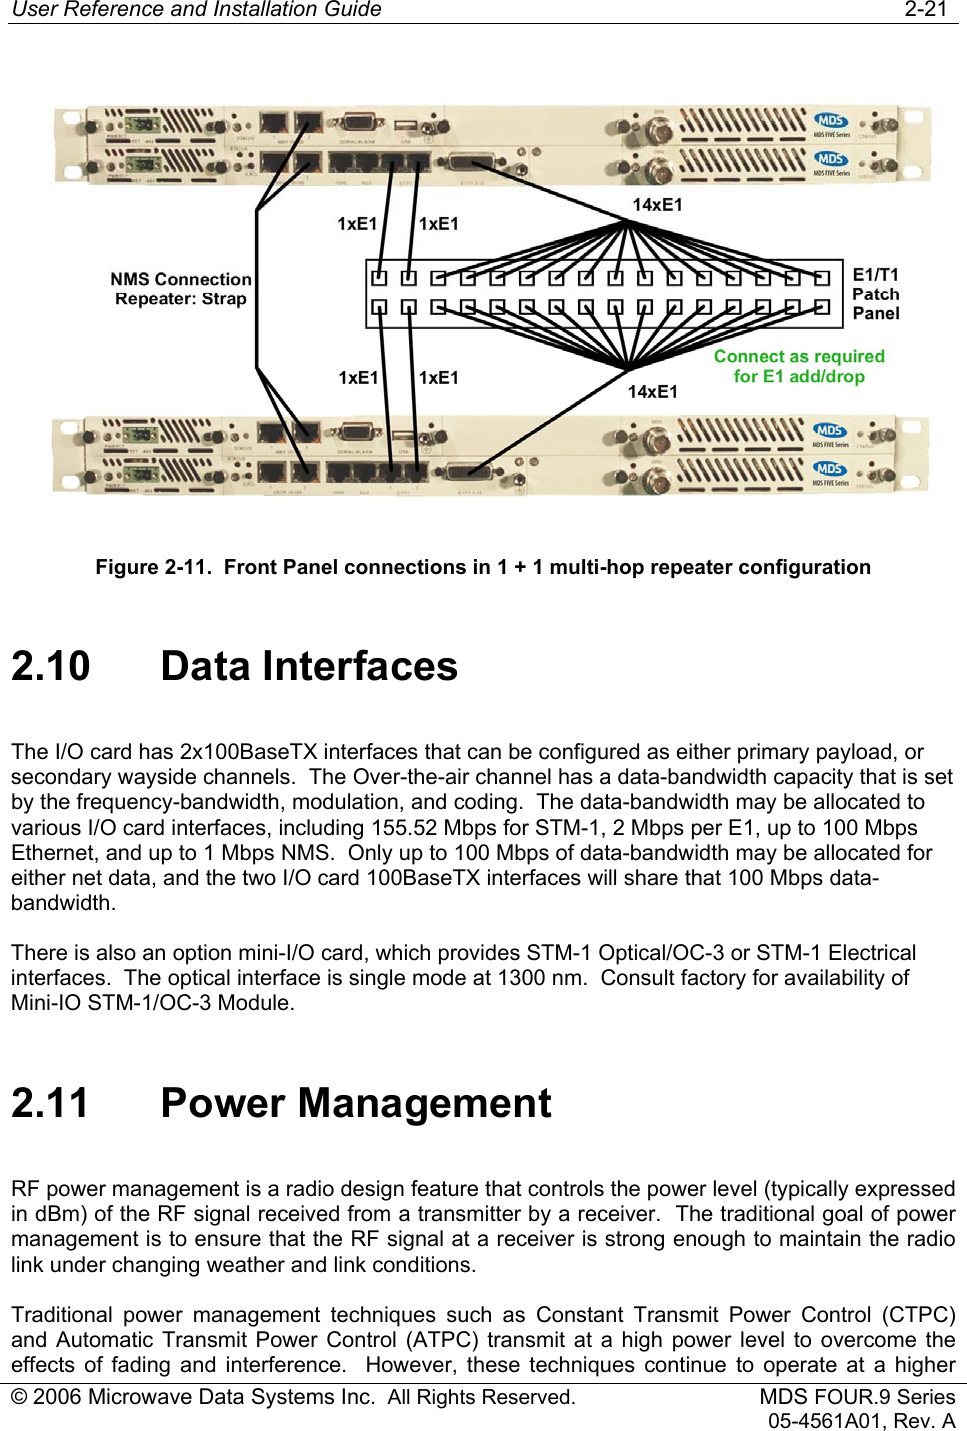 User Reference and Installation Guide   2-21 © 2006 Microwave Data Systems Inc.  All Rights Reserved. MDS FOUR.9 Series 05-4561A01, Rev. A  Figure 2-11.  Front Panel connections in 1 + 1 multi-hop repeater configuration 2.10 Data Interfaces The I/O card has 2x100BaseTX interfaces that can be configured as either primary payload, or secondary wayside channels.  The Over-the-air channel has a data-bandwidth capacity that is set by the frequency-bandwidth, modulation, and coding.  The data-bandwidth may be allocated to various I/O card interfaces, including 155.52 Mbps for STM-1, 2 Mbps per E1, up to 100 Mbps Ethernet, and up to 1 Mbps NMS.  Only up to 100 Mbps of data-bandwidth may be allocated for either net data, and the two I/O card 100BaseTX interfaces will share that 100 Mbps data-bandwidth. There is also an option mini-I/O card, which provides STM-1 Optical/OC-3 or STM-1 Electrical interfaces.  The optical interface is single mode at 1300 nm.  Consult factory for availability of Mini-IO STM-1/OC-3 Module. 2.11 Power Management RF power management is a radio design feature that controls the power level (typically expressed in dBm) of the RF signal received from a transmitter by a receiver.  The traditional goal of power management is to ensure that the RF signal at a receiver is strong enough to maintain the radio link under changing weather and link conditions. Traditional power management techniques such as Constant Transmit Power Control (CTPC) and Automatic Transmit Power Control (ATPC) transmit at a high power level to overcome the effects of fading and interference.  However, these techniques continue to operate at a higher 